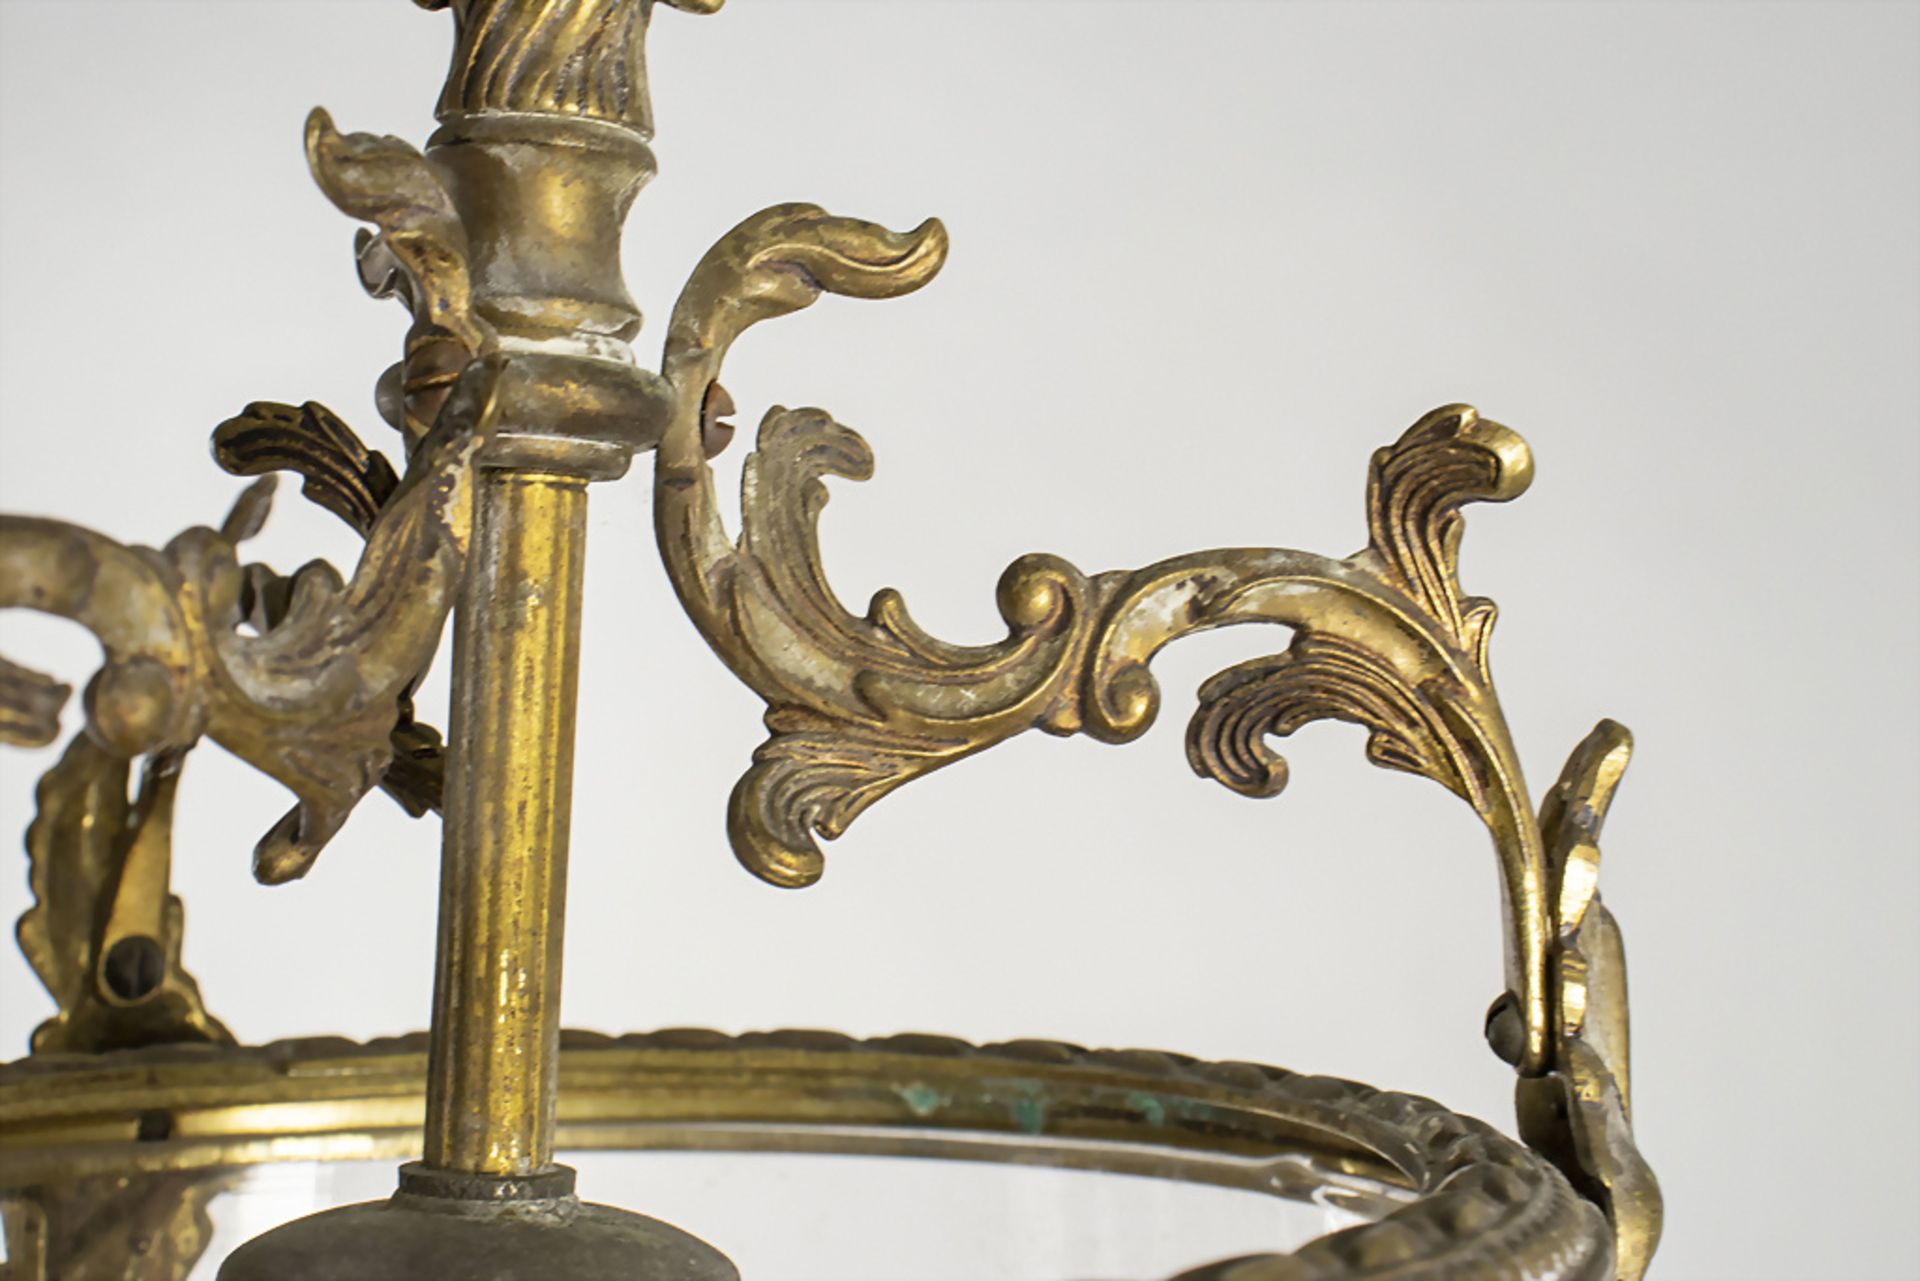 Flurlampe / A hallway ceiling lamp, Frankreich, Anfang 20. Jh. - Image 5 of 5